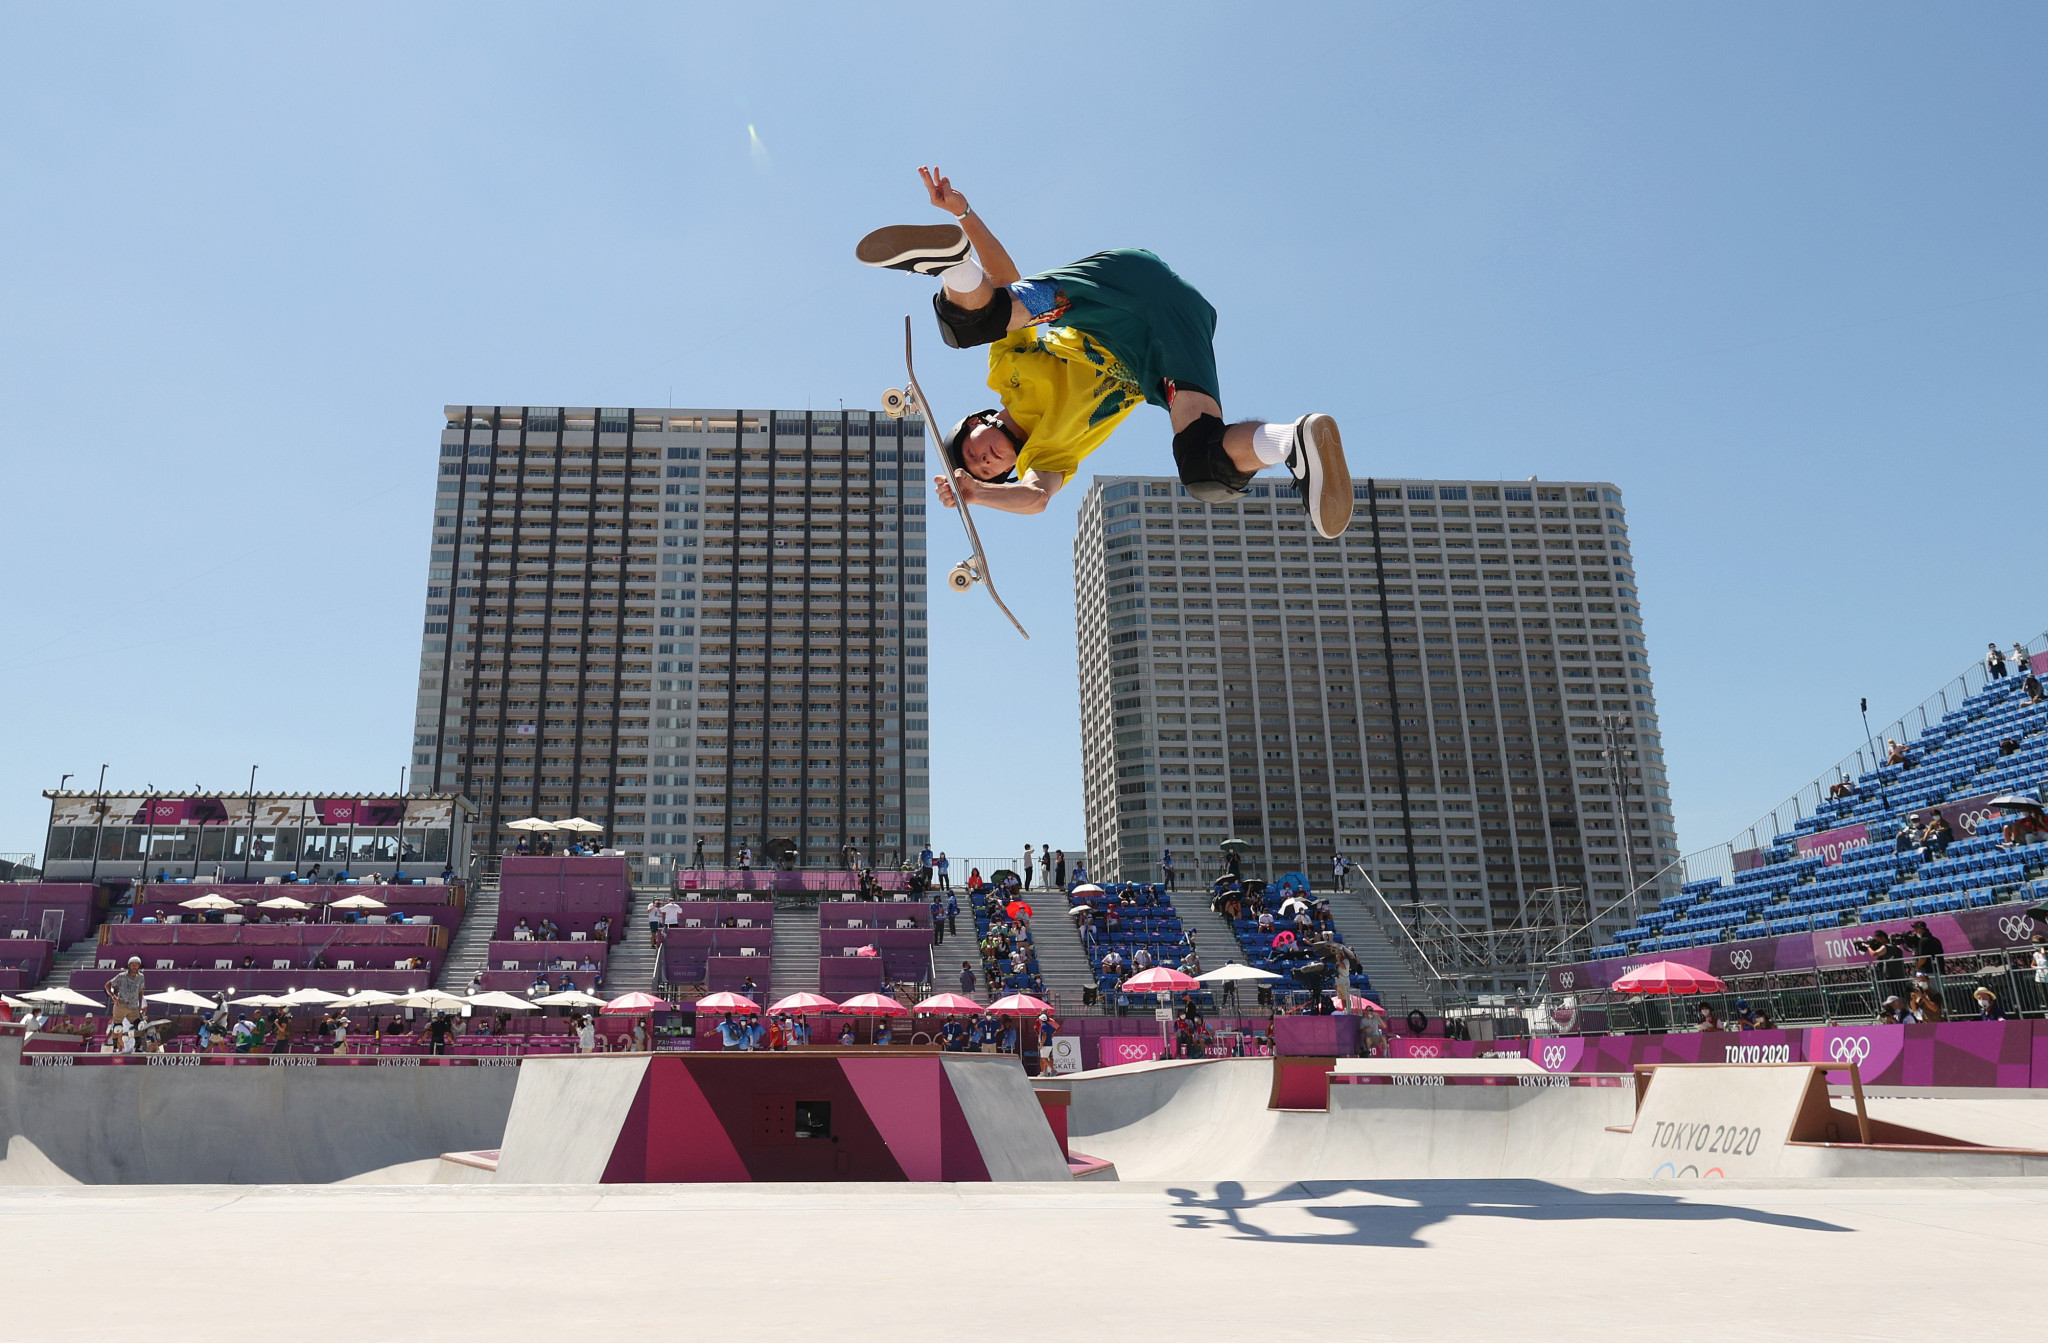 World Skate extends partnership with ITA until 2025